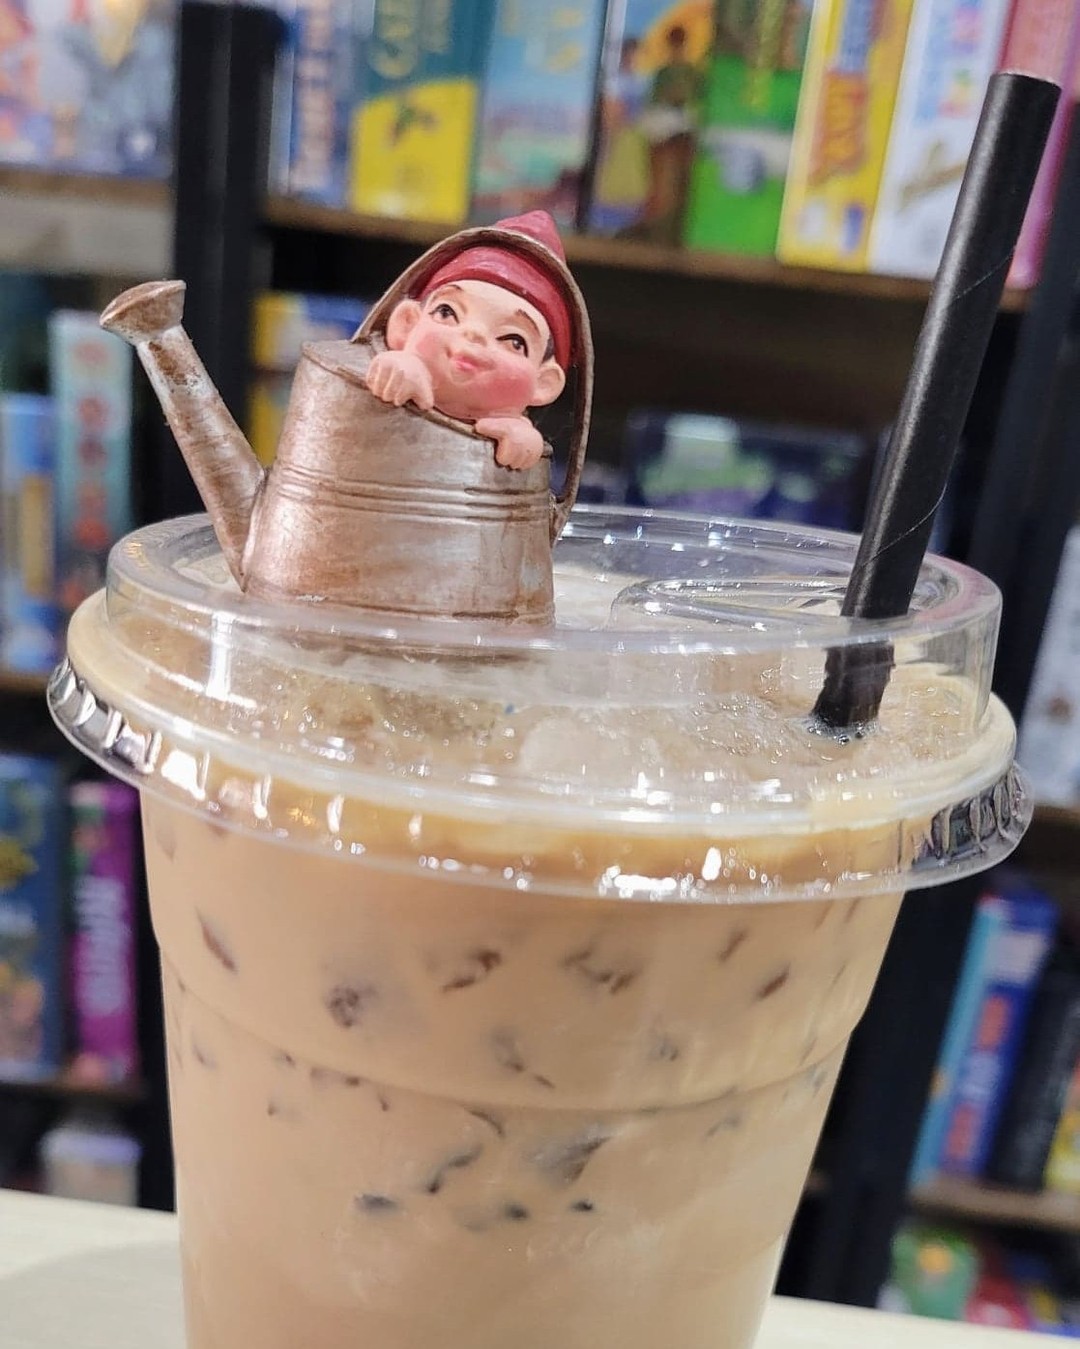 Wanting an iced latte? Look no farther than The Gnoshery! We can customize the latte with any of our alternative milks or syrups to your liking. The latte featured in the picture above is a Iced Dirty Chai Latte with oat milk!

#TheGnoshery #Gnomegames ##icedlatte #coffee #tea